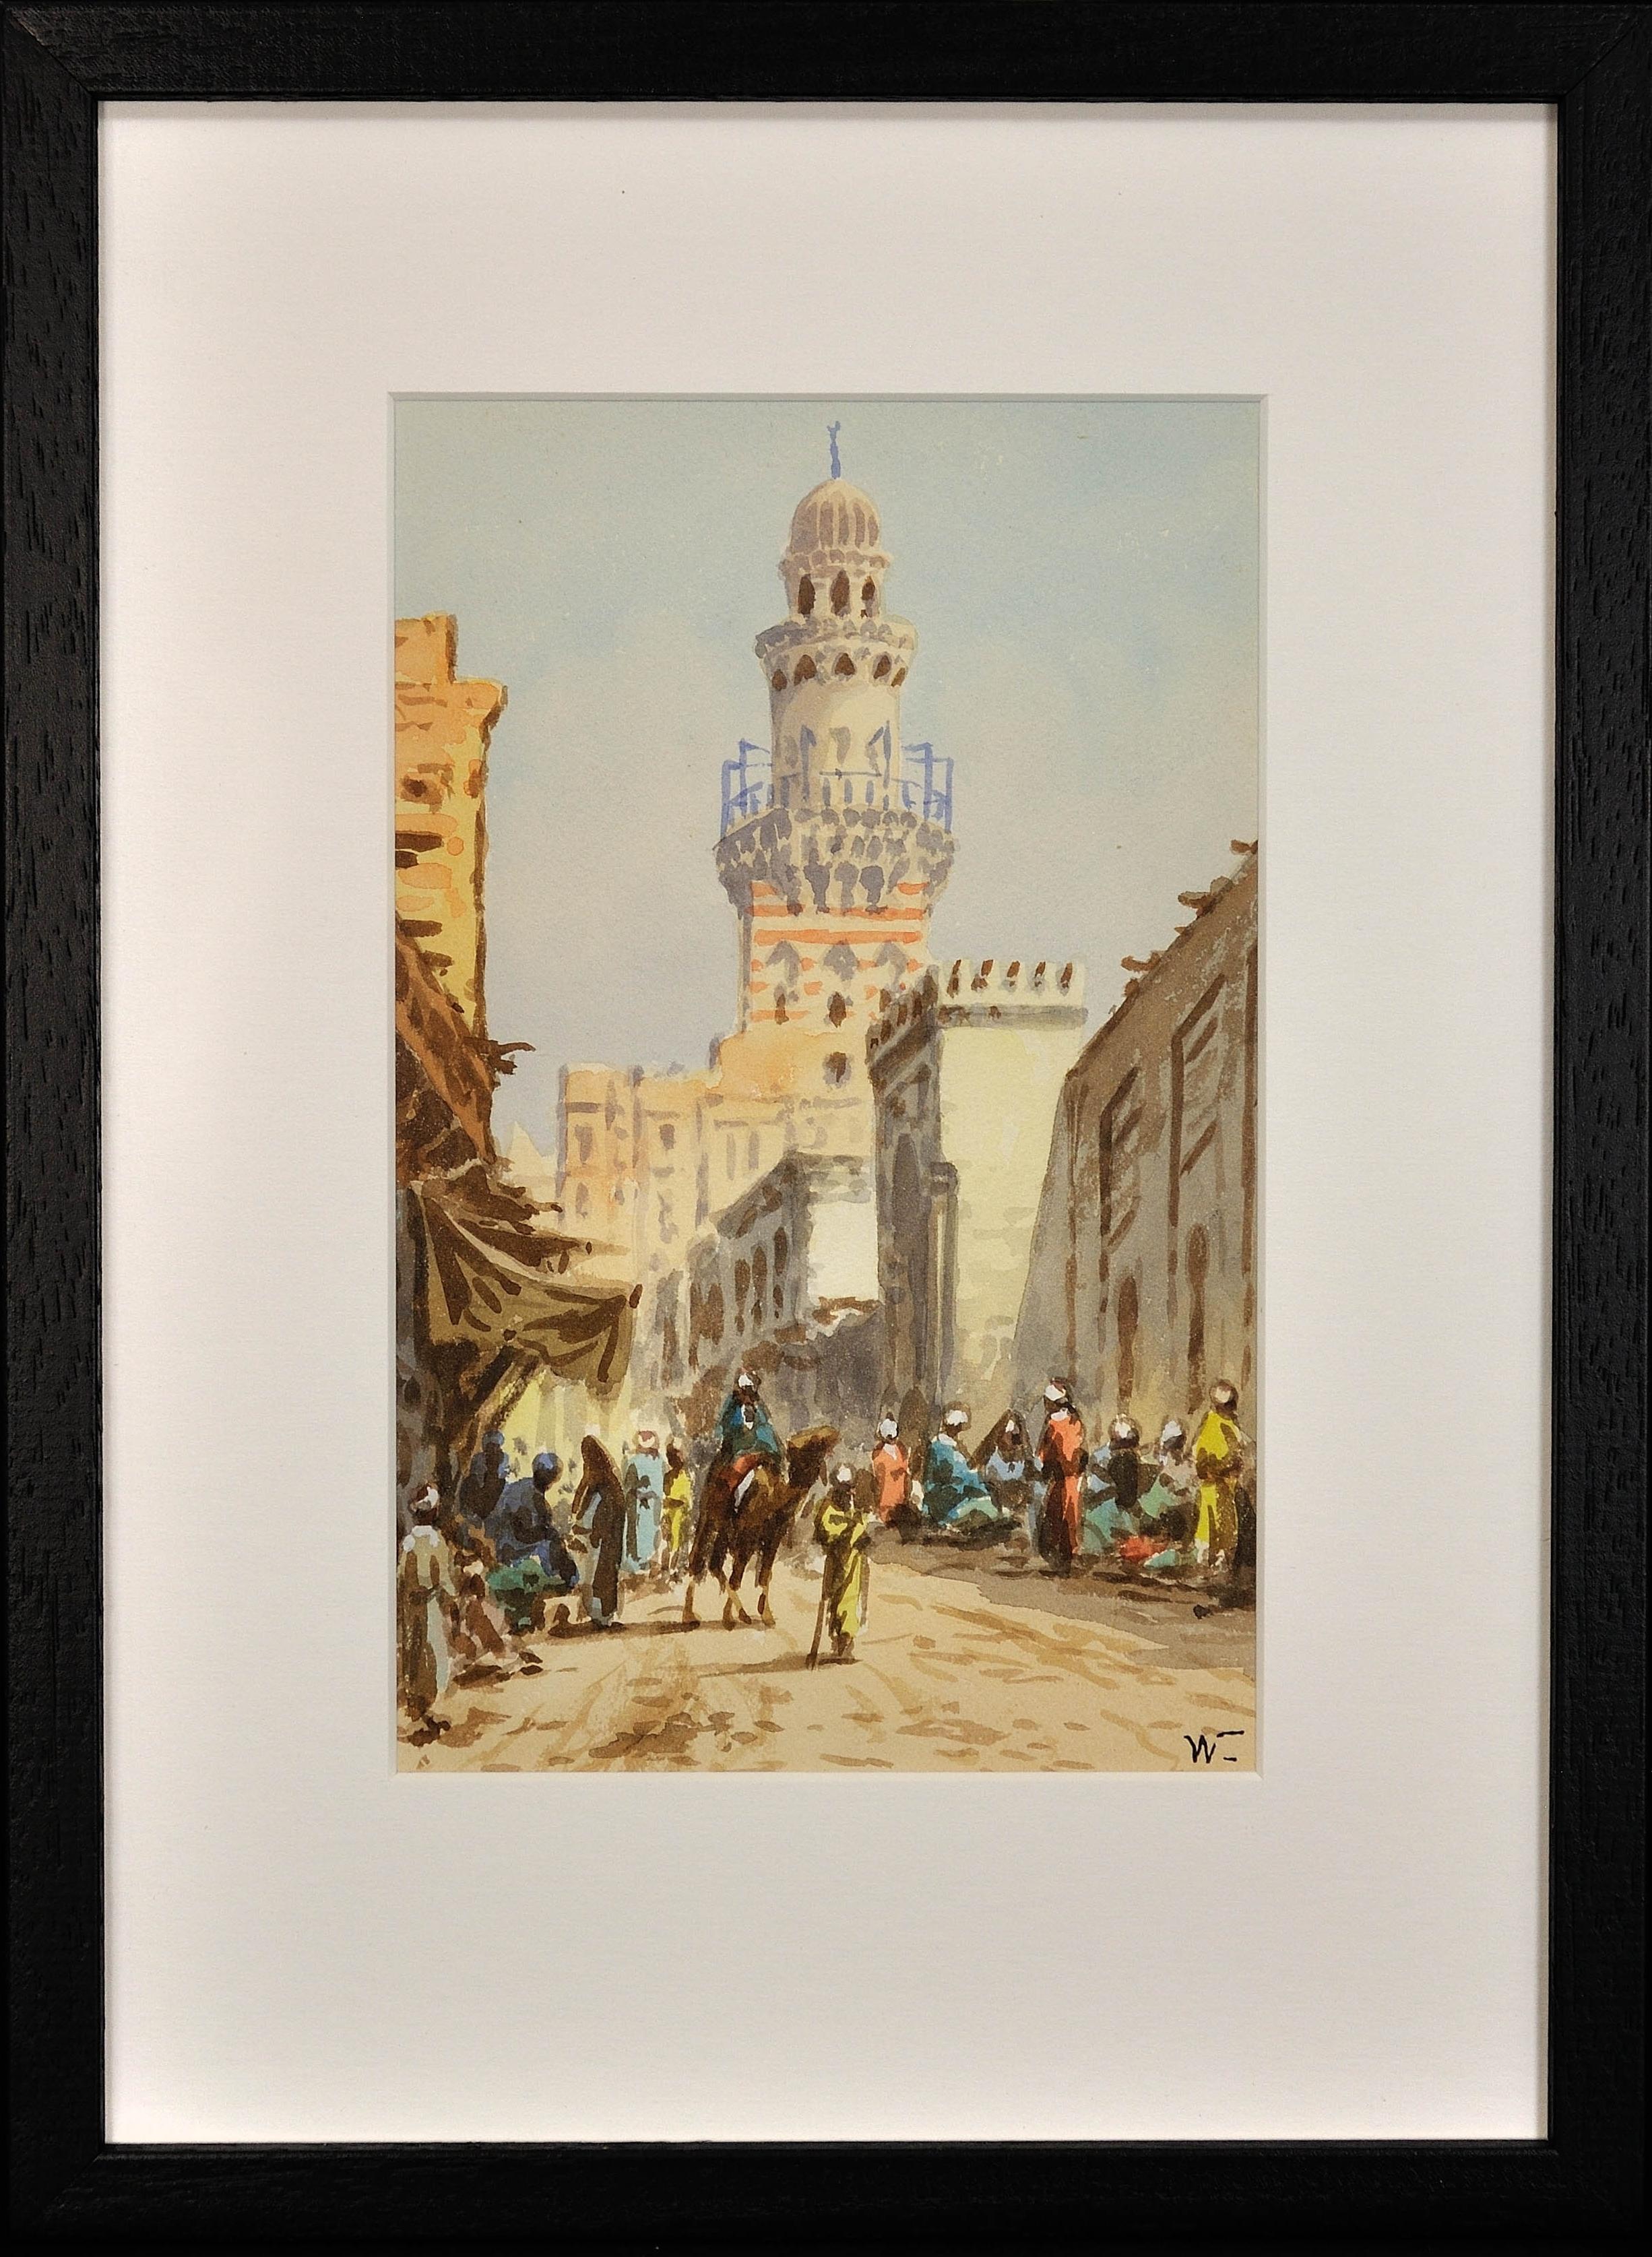 Edwin Lord Weeks Landscape Art - A Busy Cairo Street with Traders & Travellers, Egypt. American Orientalist.